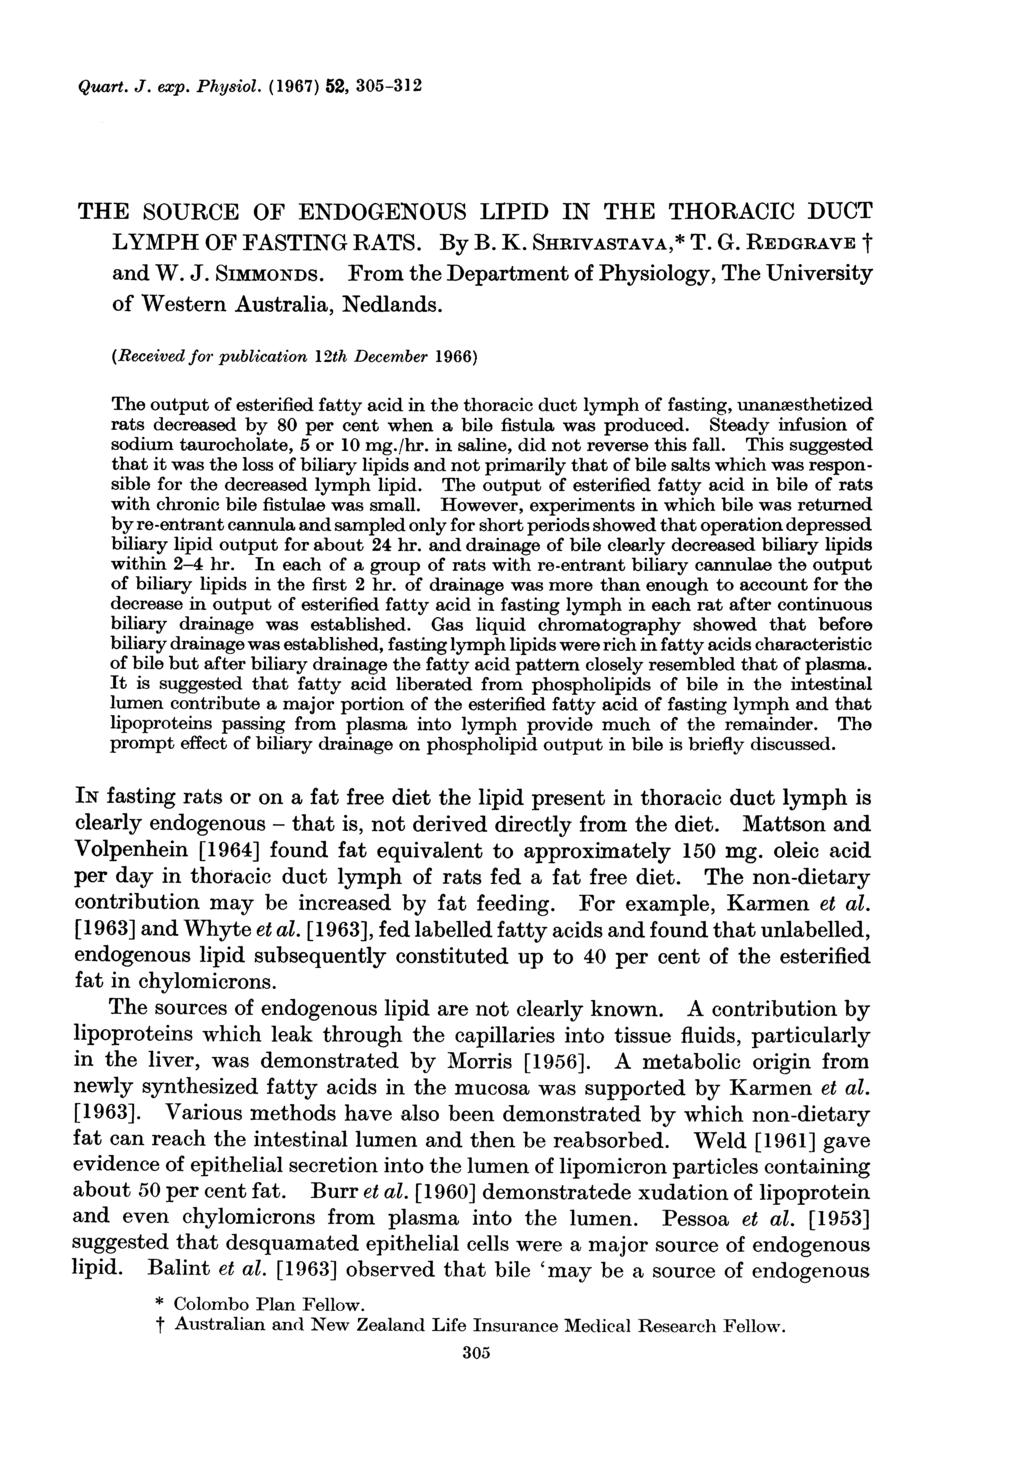 Quart. J. exp. Physiol. (1967) 52, 305-312 THE SOURCE OF ENDOGENOUS LIPID IN THE THORACIC DUCT LYMPH OF FASTING RATS. By B. K. SHRIVASTAVA,* T. G. REDGRAVE t and W. J. SIMMONDS.